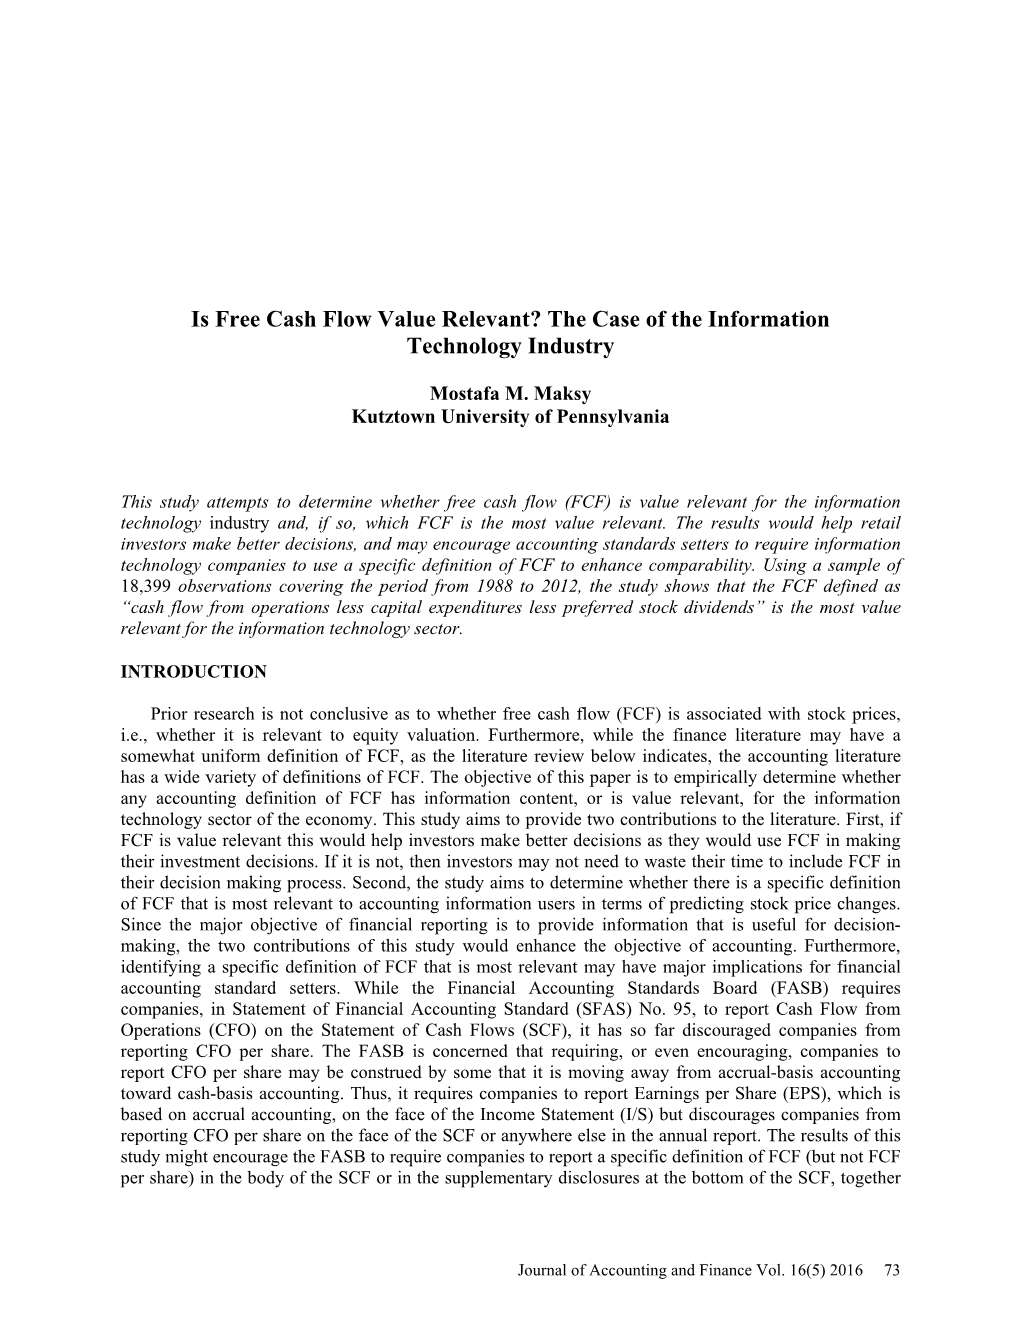 Is Free Cash Flow Value Relevant? the Case of the Information Technology Industry